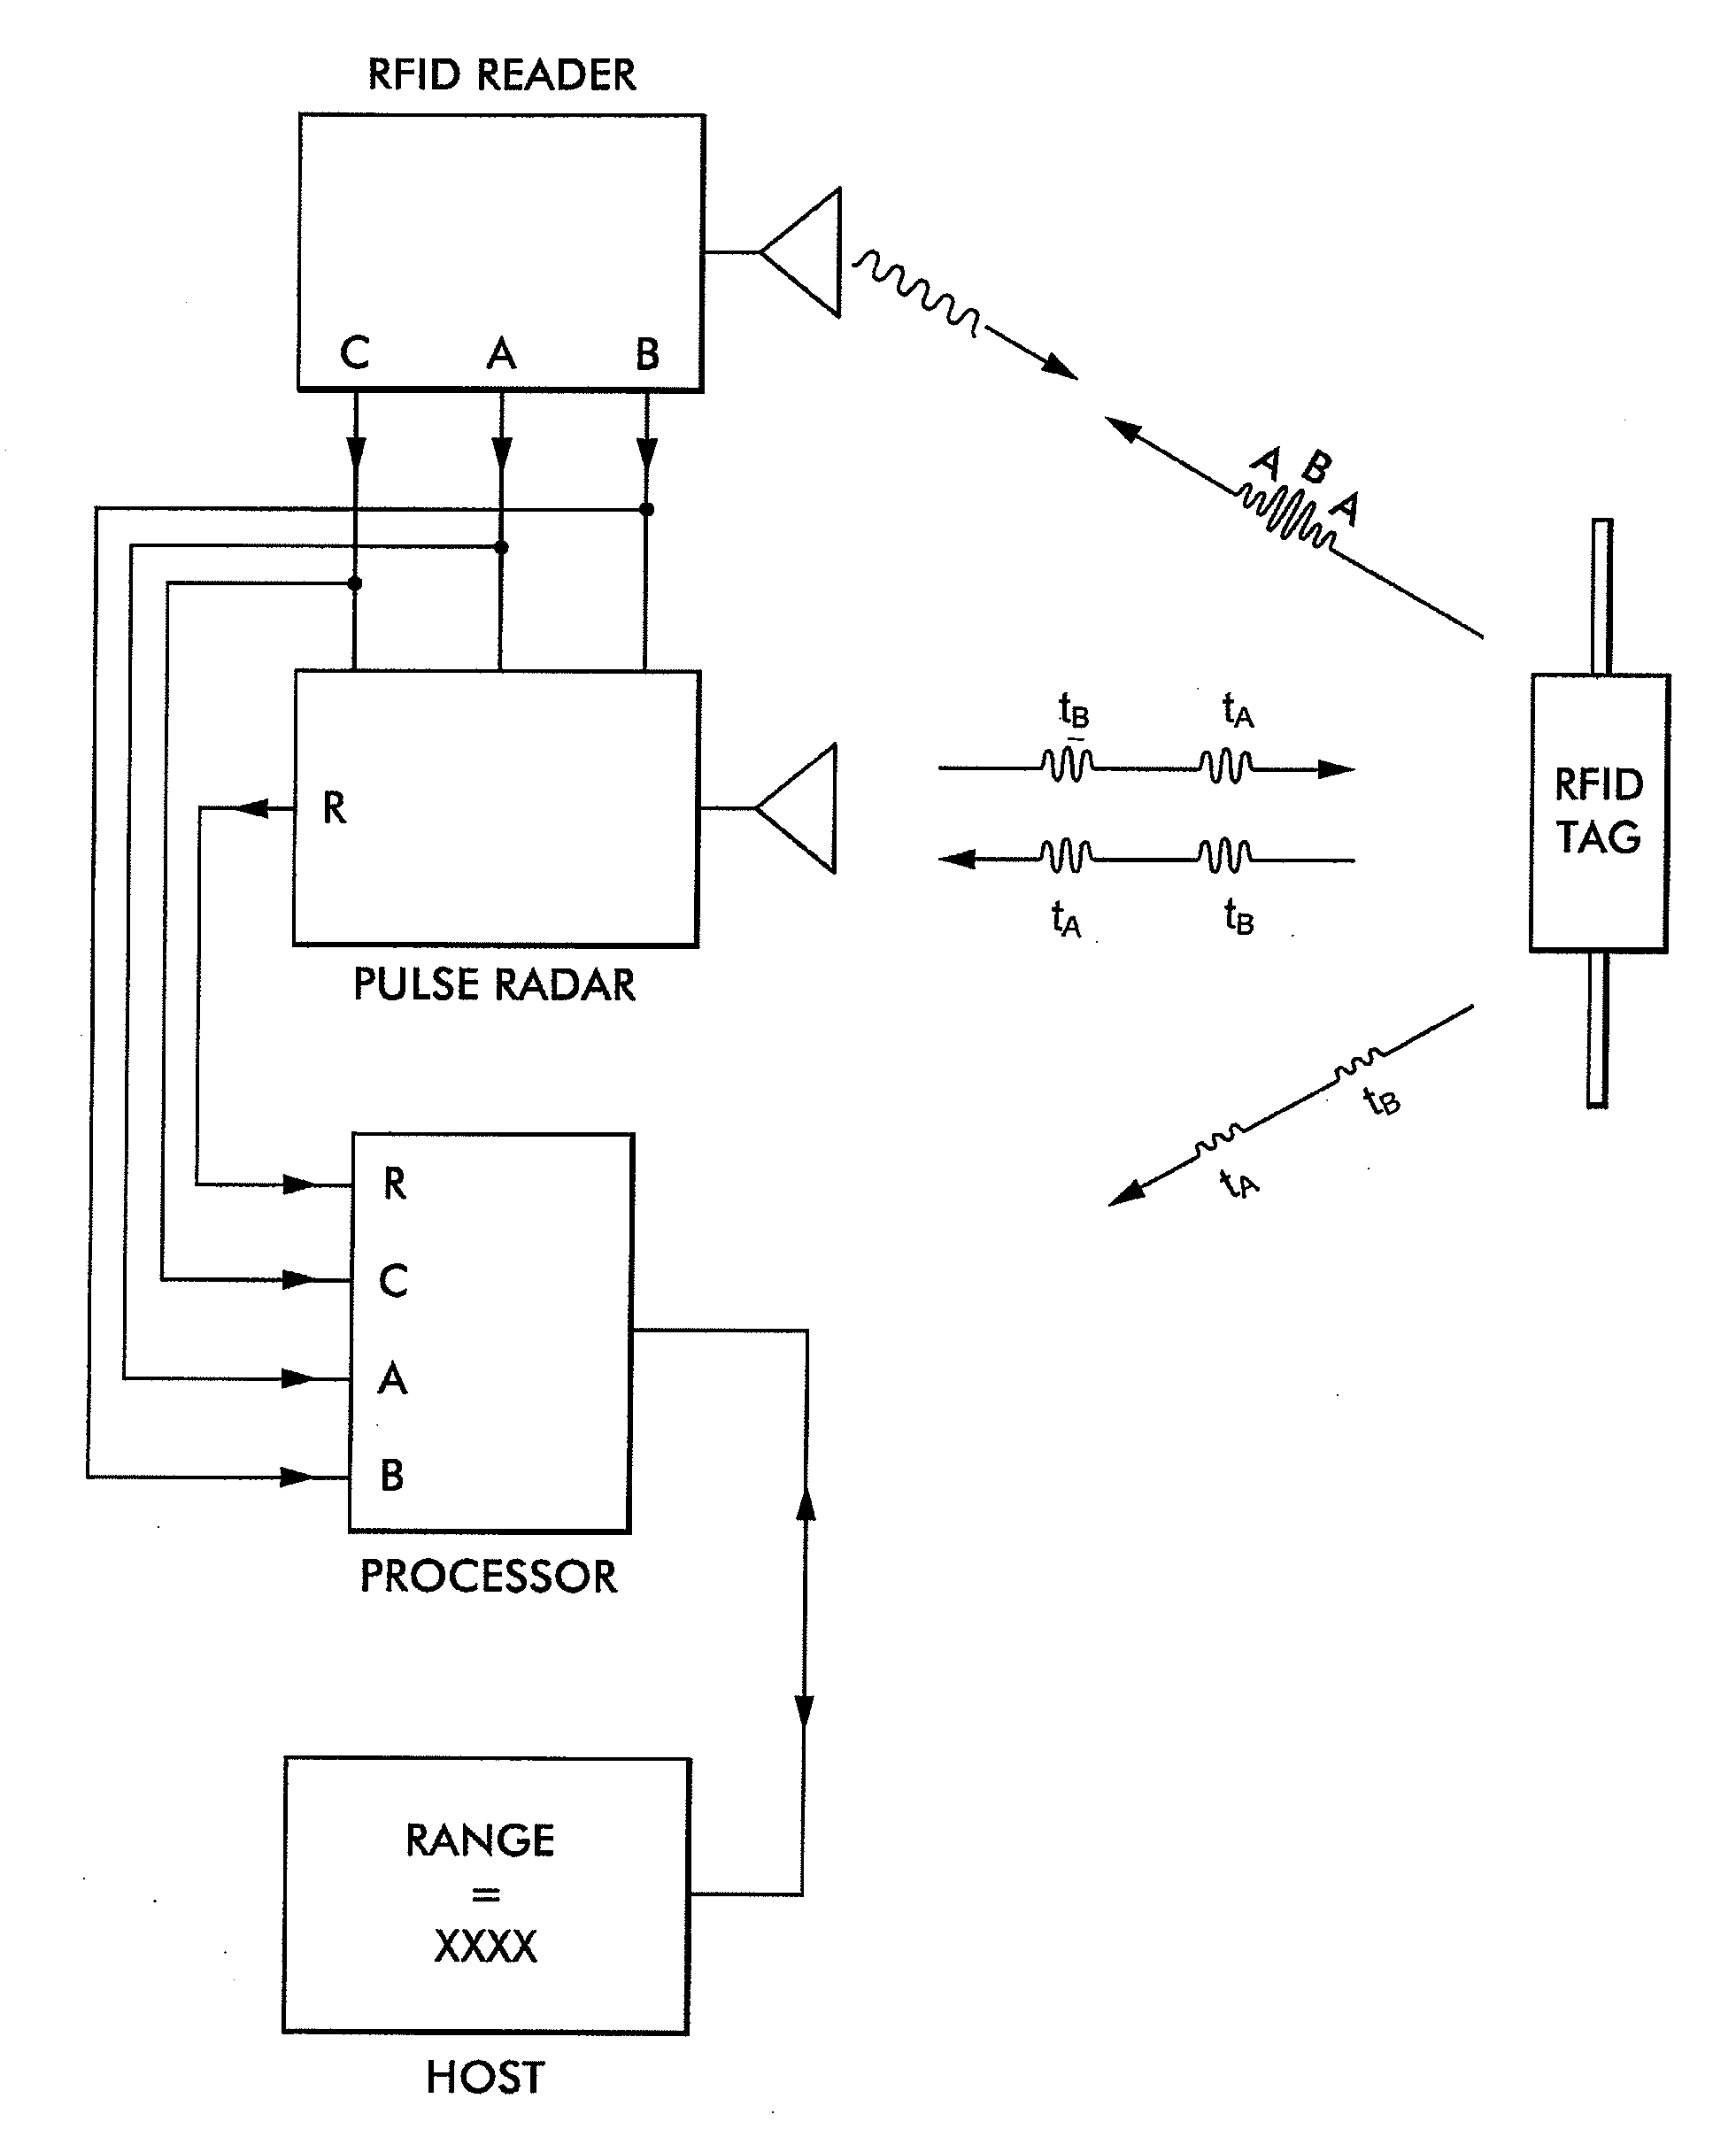 System and method for microwave ranging to a target in presence of clutter and multi-path effects